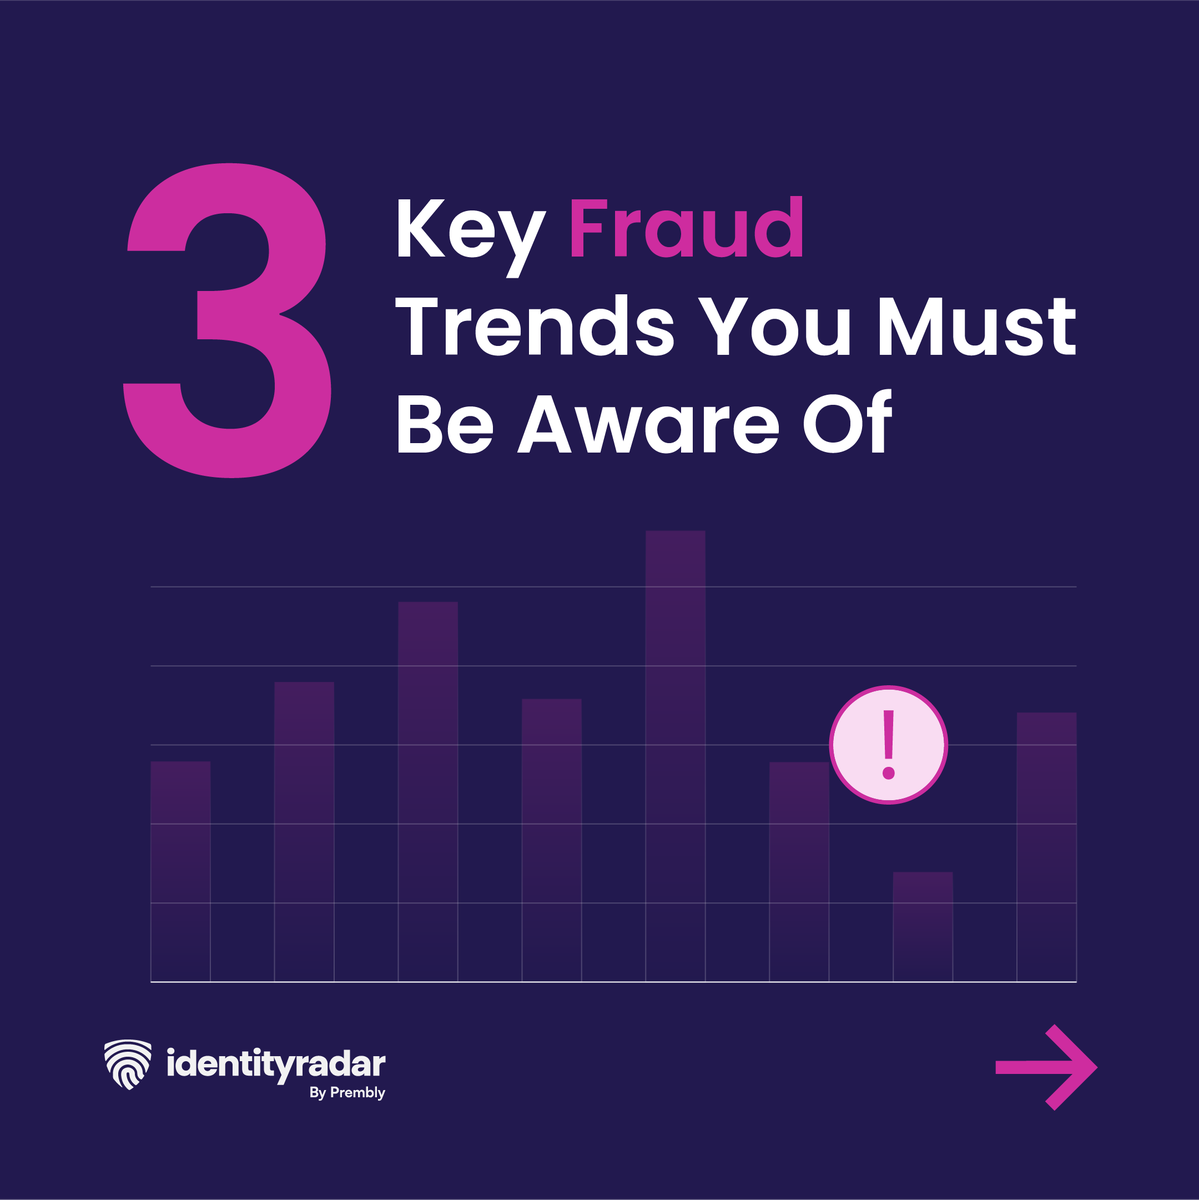 3 Key Fraud Trends You Must Be Aware of.
#fraudprevention #identityprotection #cybersecurity #Identityradar